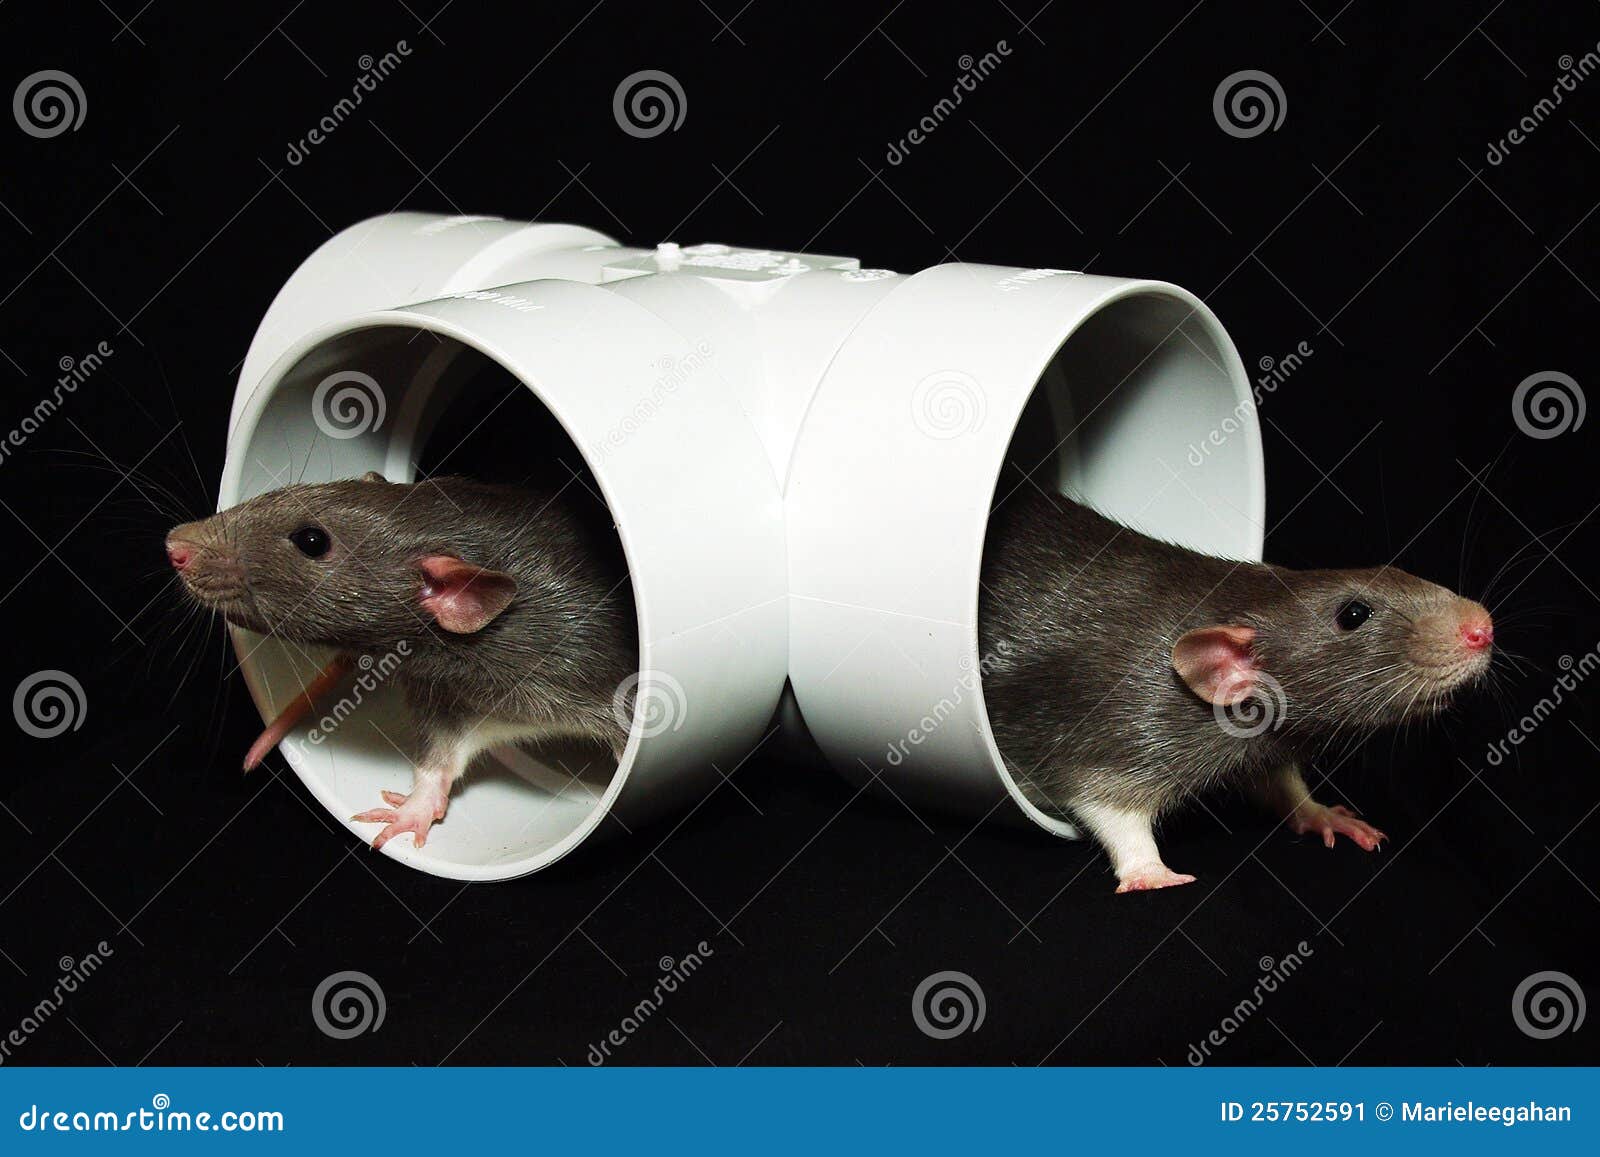 rats brothers